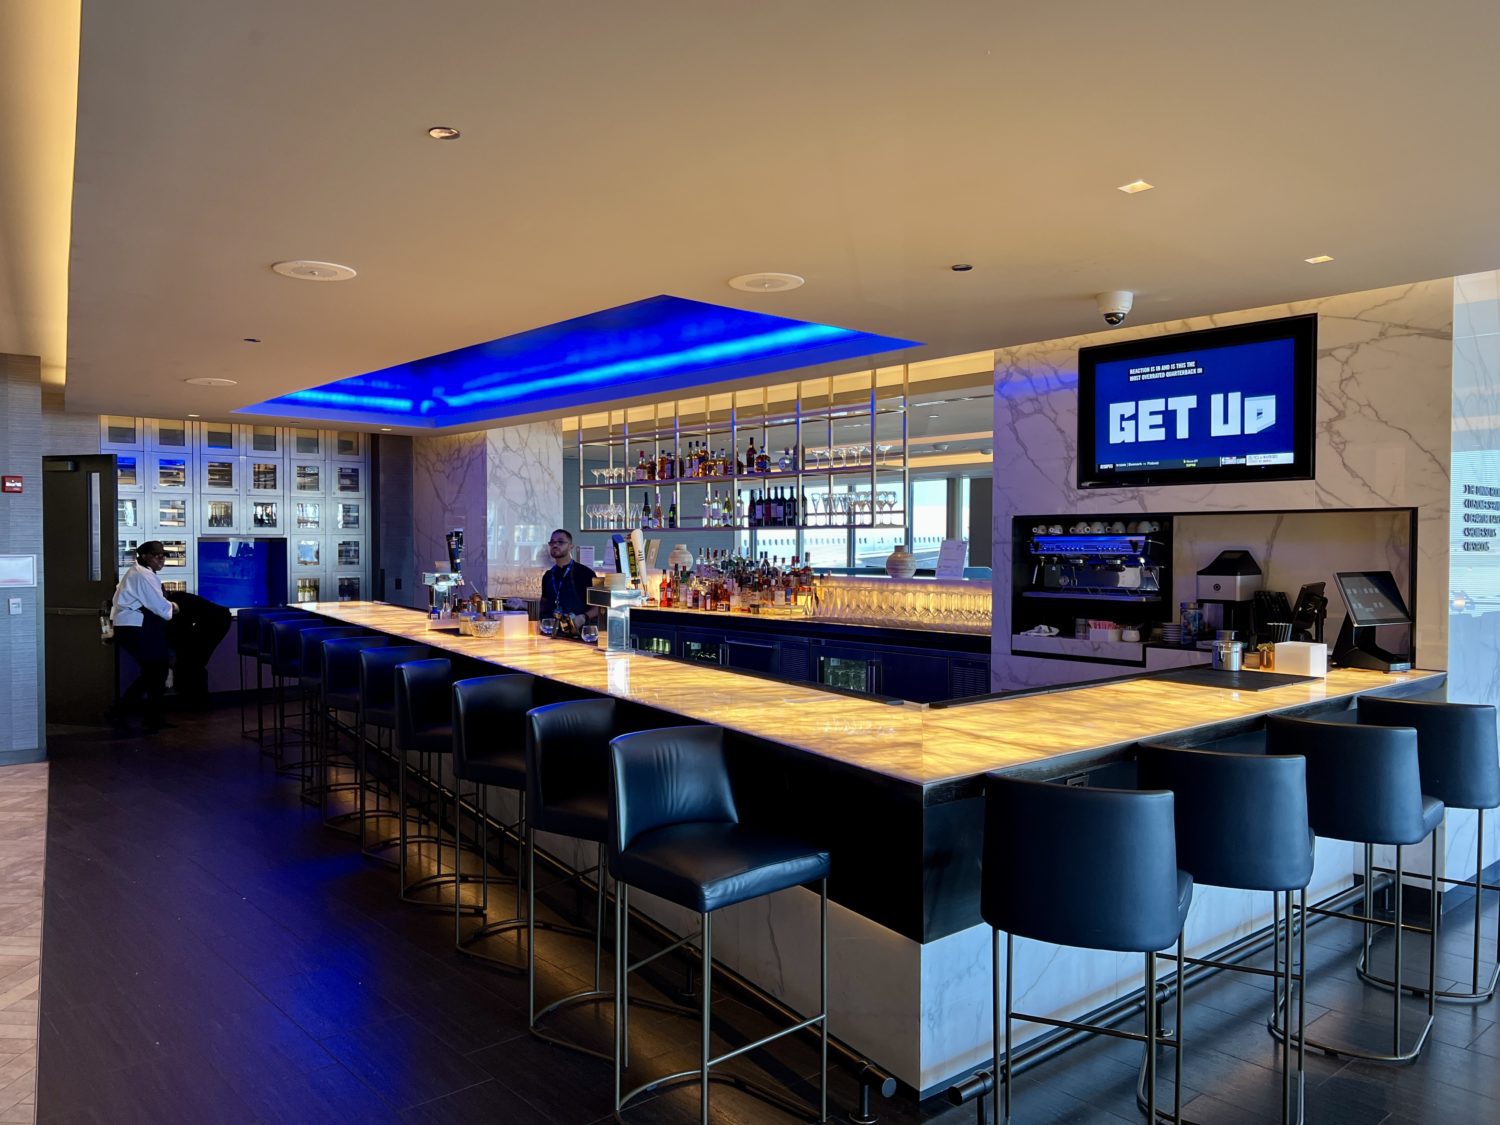 united polaris lounge bar  Beautiful But Busy: United Polaris Lounge Chicago-O&#039;Hare (ORD) Review – Thrifty Traveler &#8211; Thrifty Traveler united polaris lounge chicago bar scaled